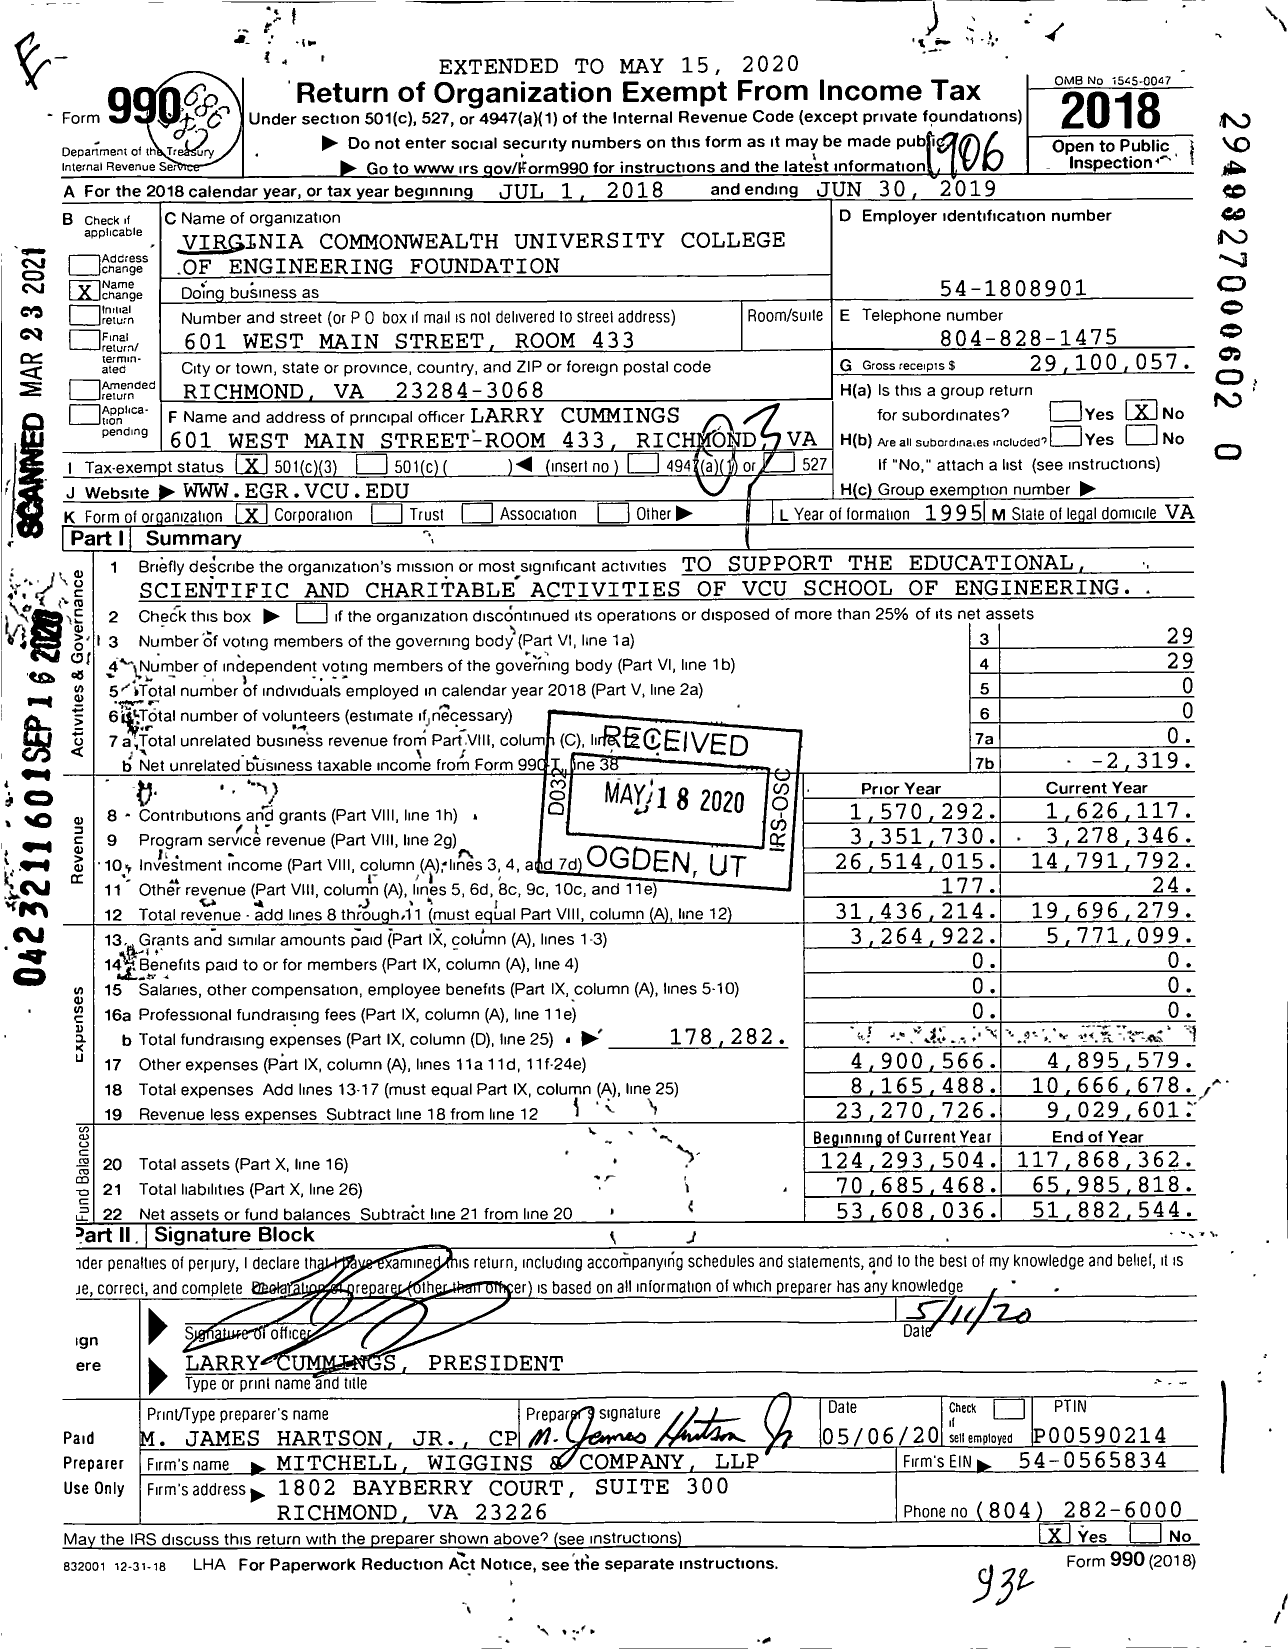 Image of first page of 2018 Form 990 for Virginia Commonwealth University College of Engineering Foundation